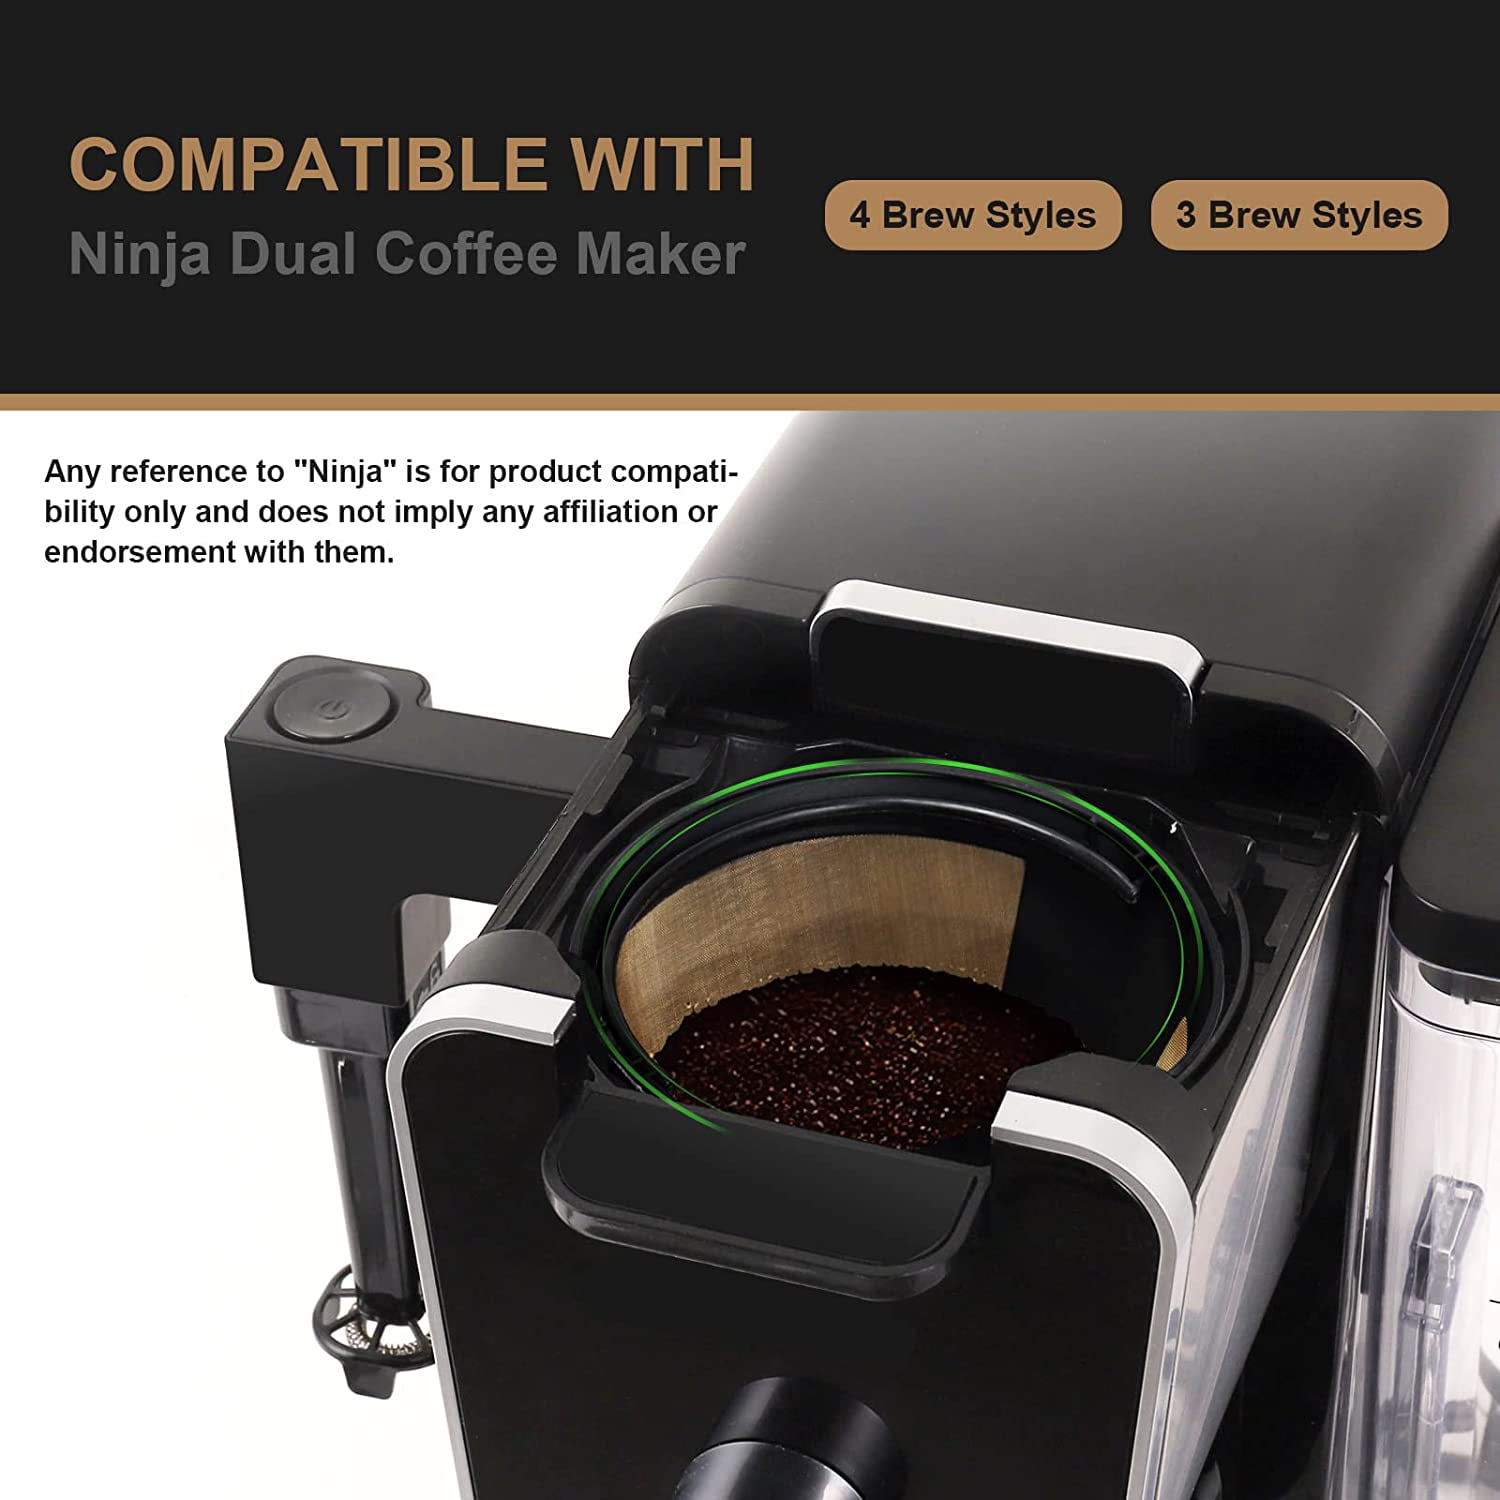  Aieve Reusable Coffee Filter Compatible with Ninja Dual Brew  Pro Coffee Maker CFP301 CFP201 CFN601, Coffee Filters #4 Permanent Cone  Coffee Basket: Home & Kitchen